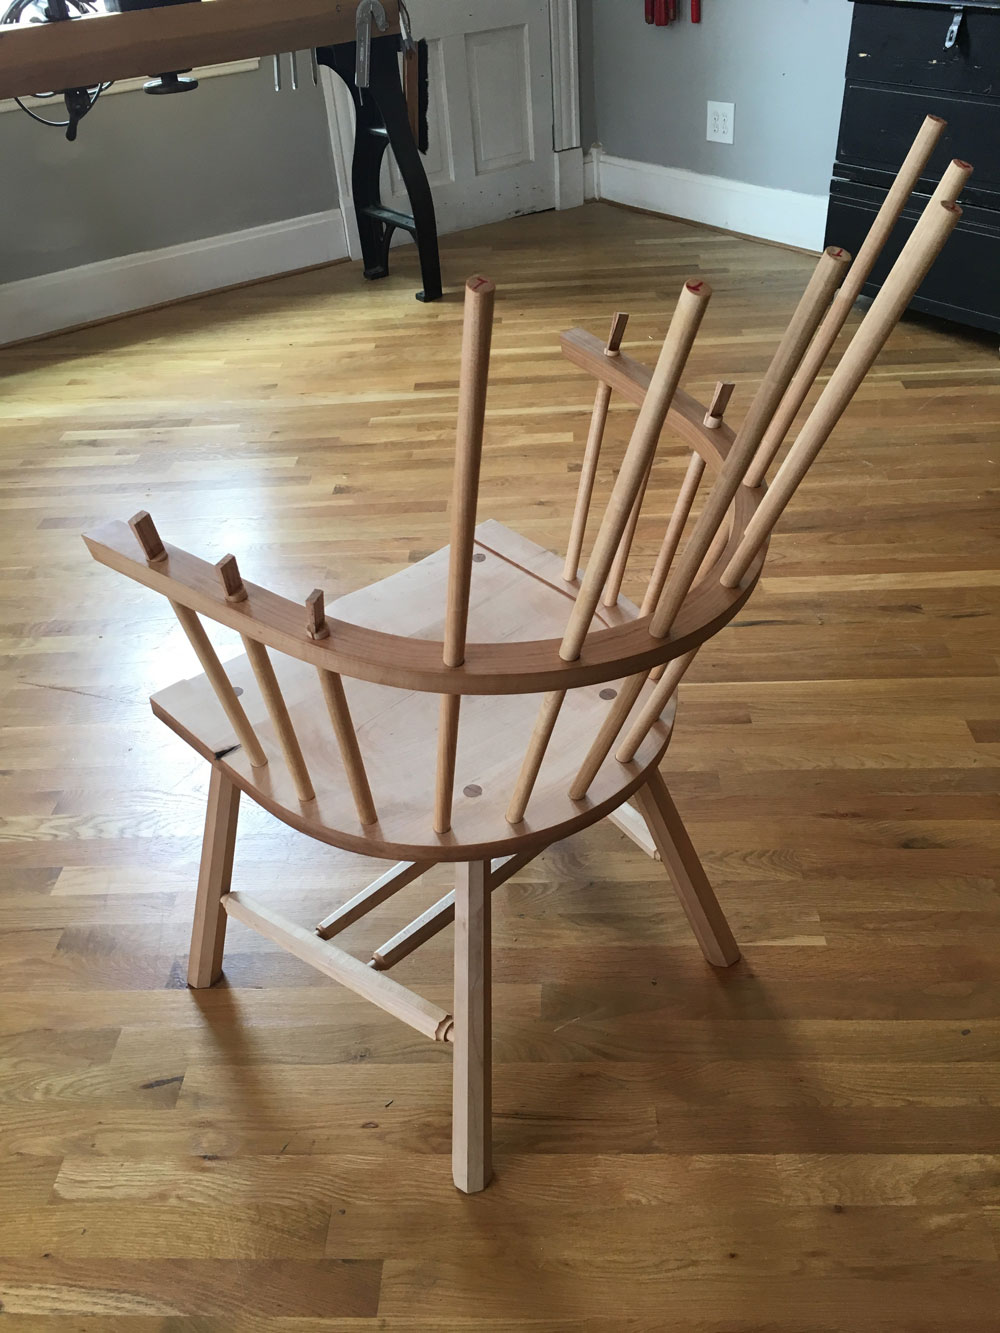 Why Add Stretchers to a Chair (And Why Not?) – Lost Art Press